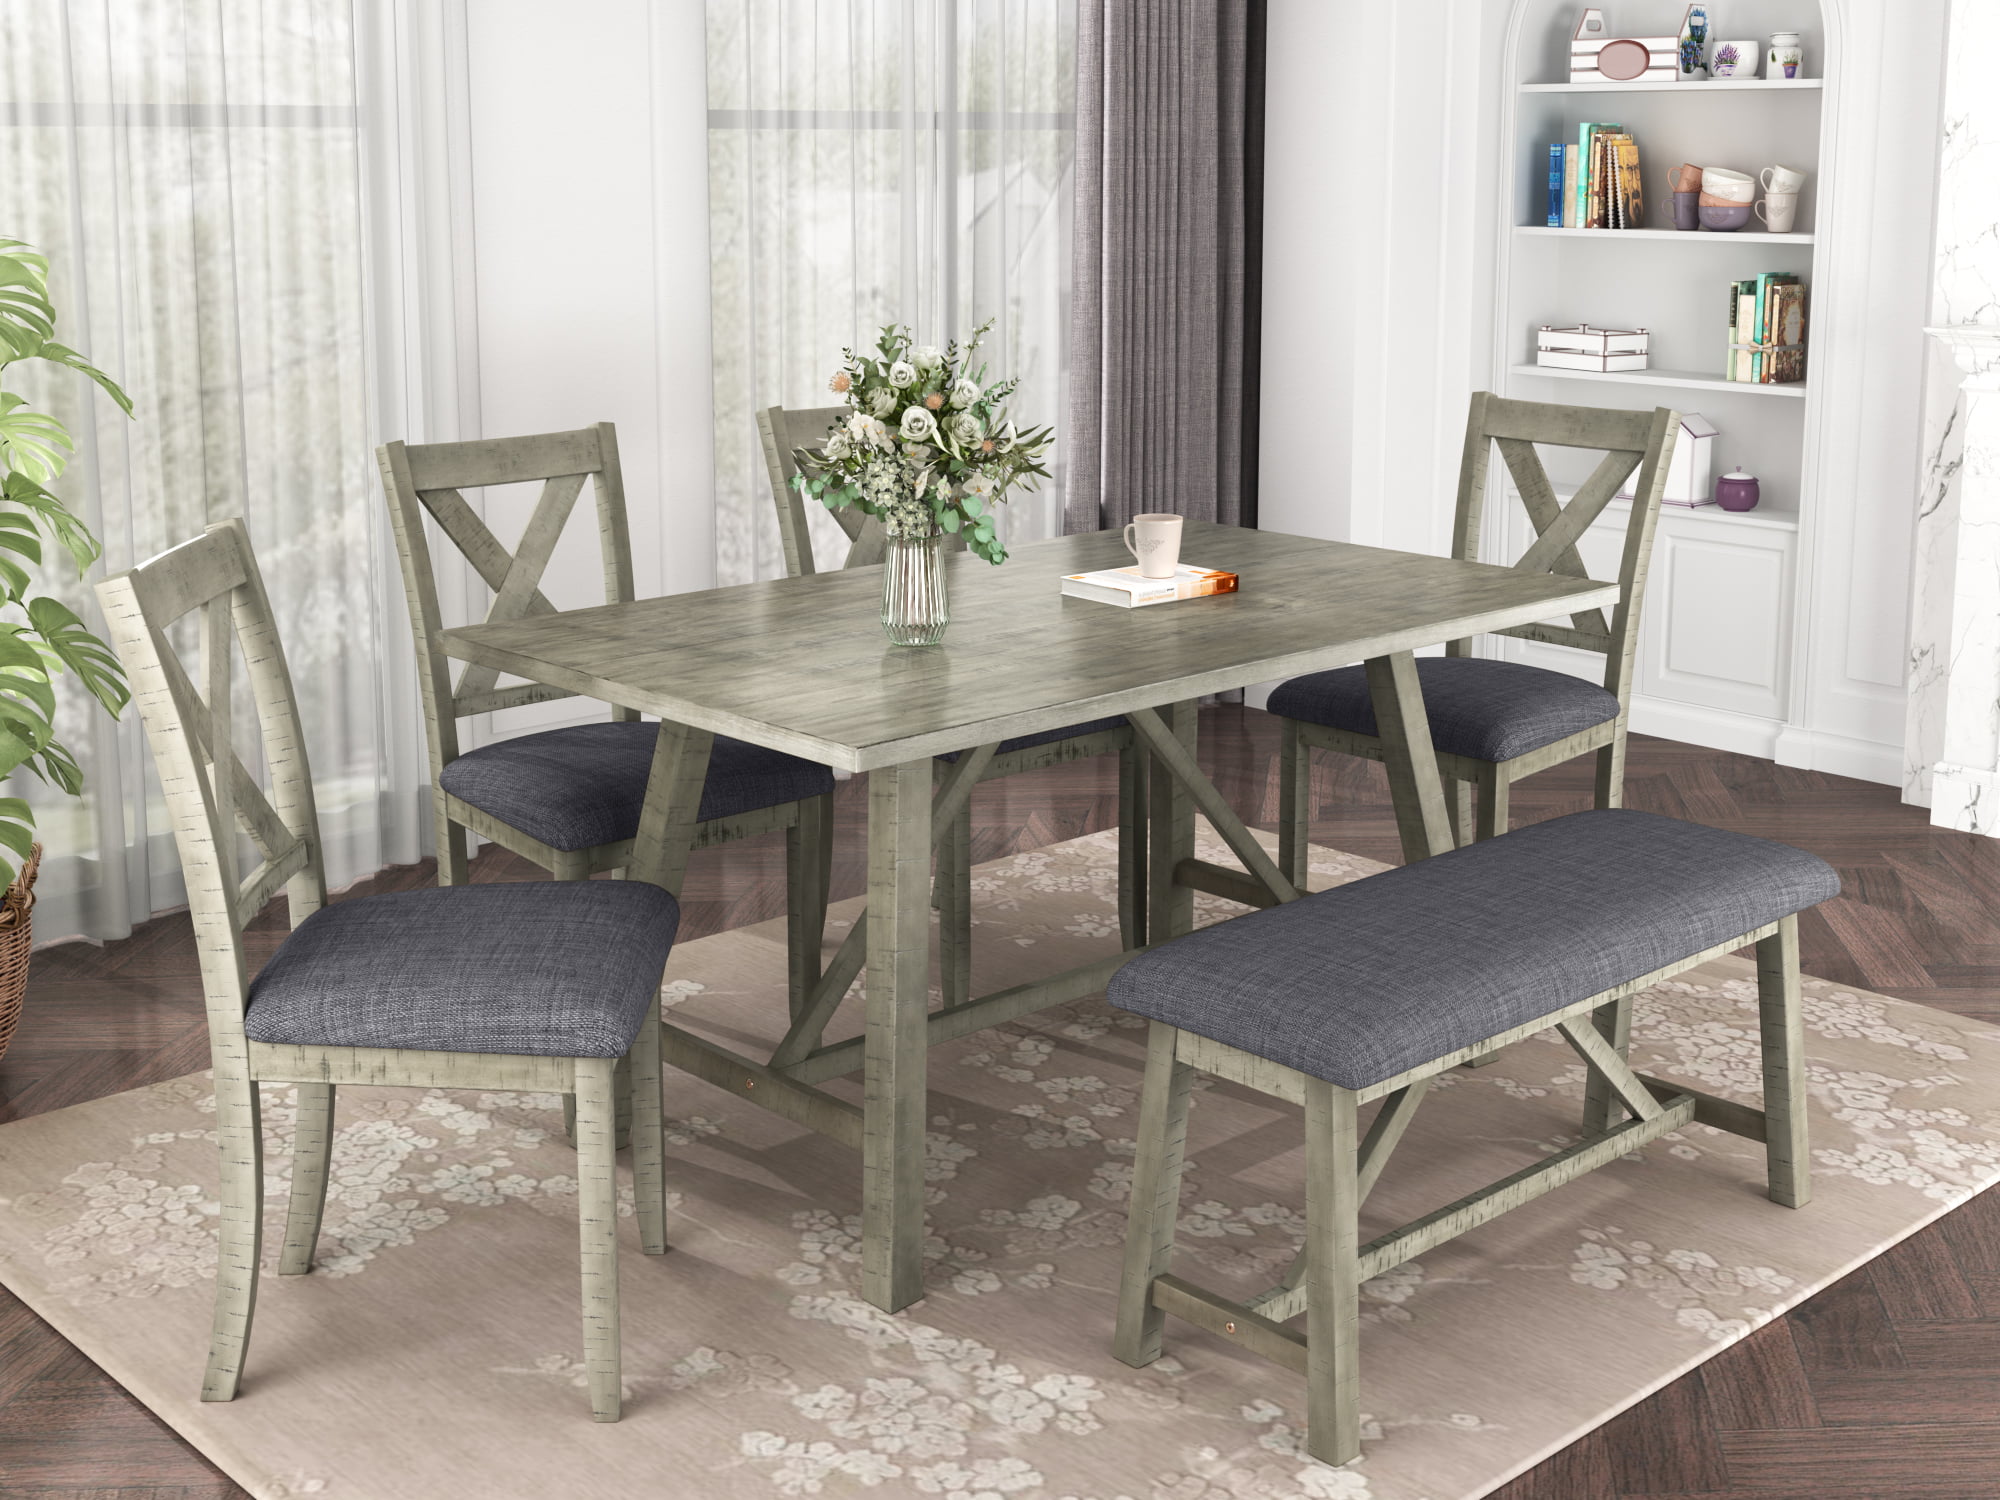 CLEARANCE! Kitchen Table and 4 Chairs and Bench Set, 60'' x 36'' x 30